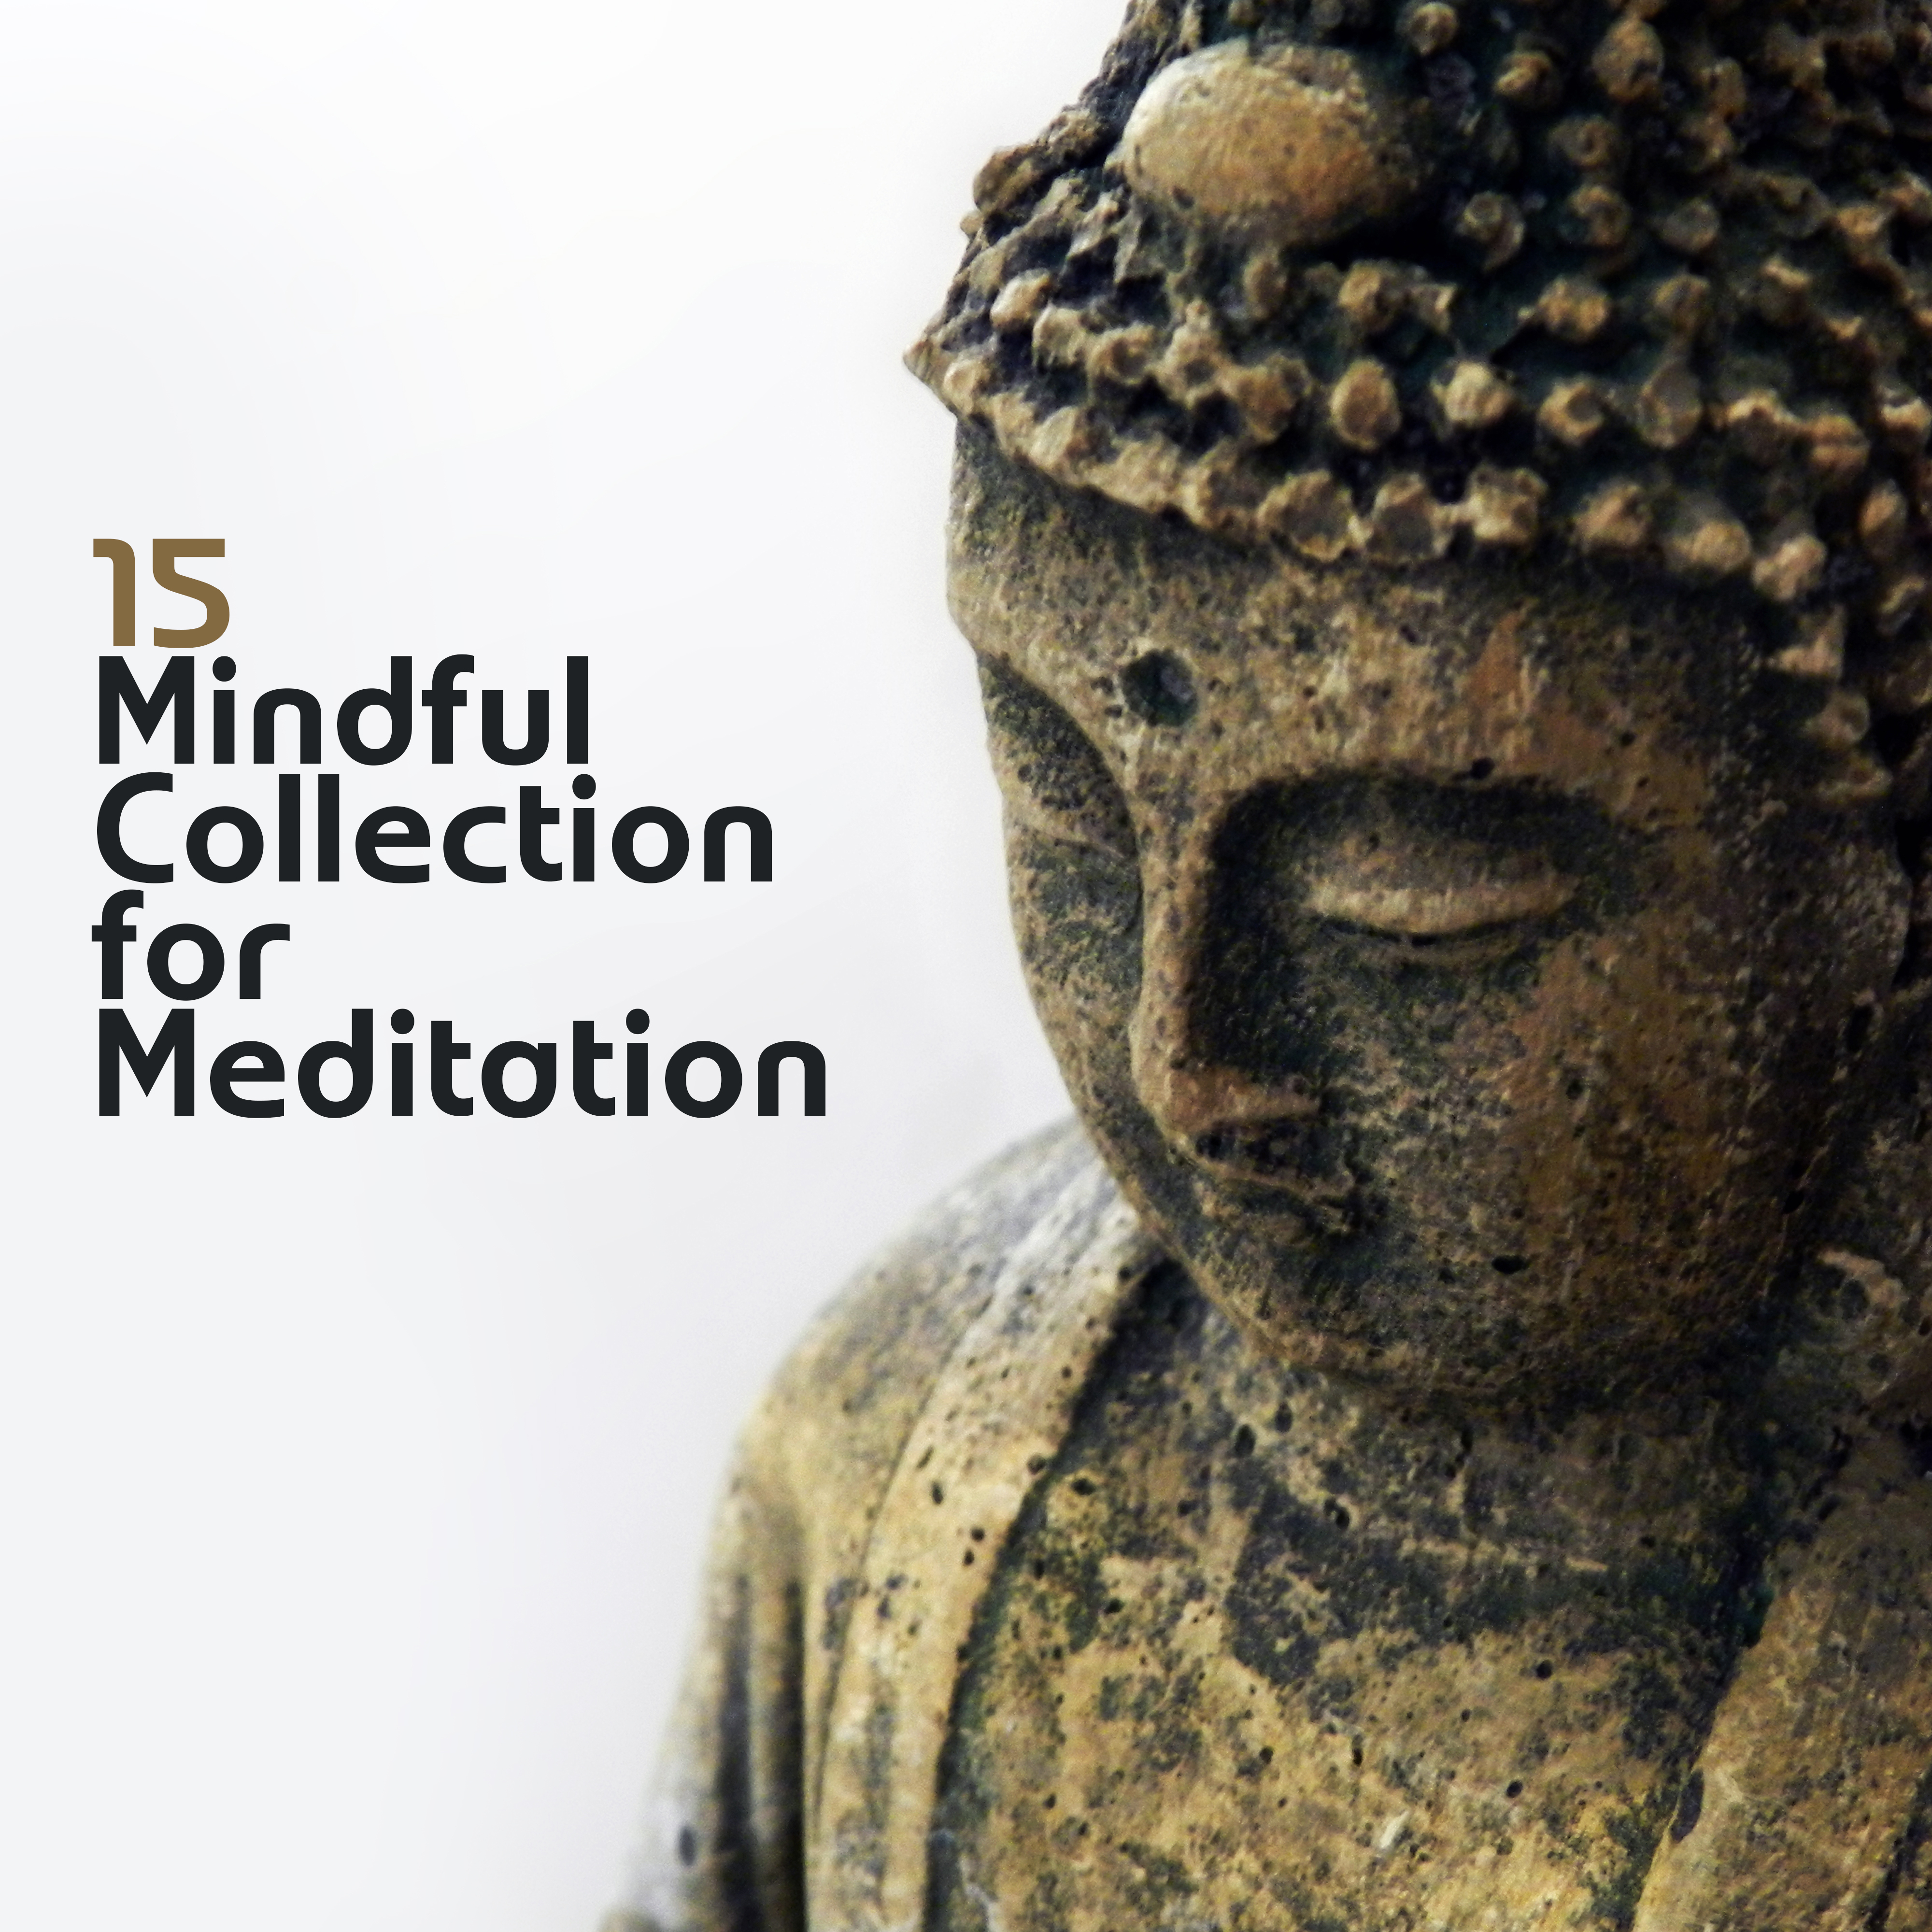 15 Mindful Collection for Meditation  Healing Music for Yoga Practice, Calm Down, Sleep, Relax, Deep Meditation, Kundalini Zen, Reduce Stress